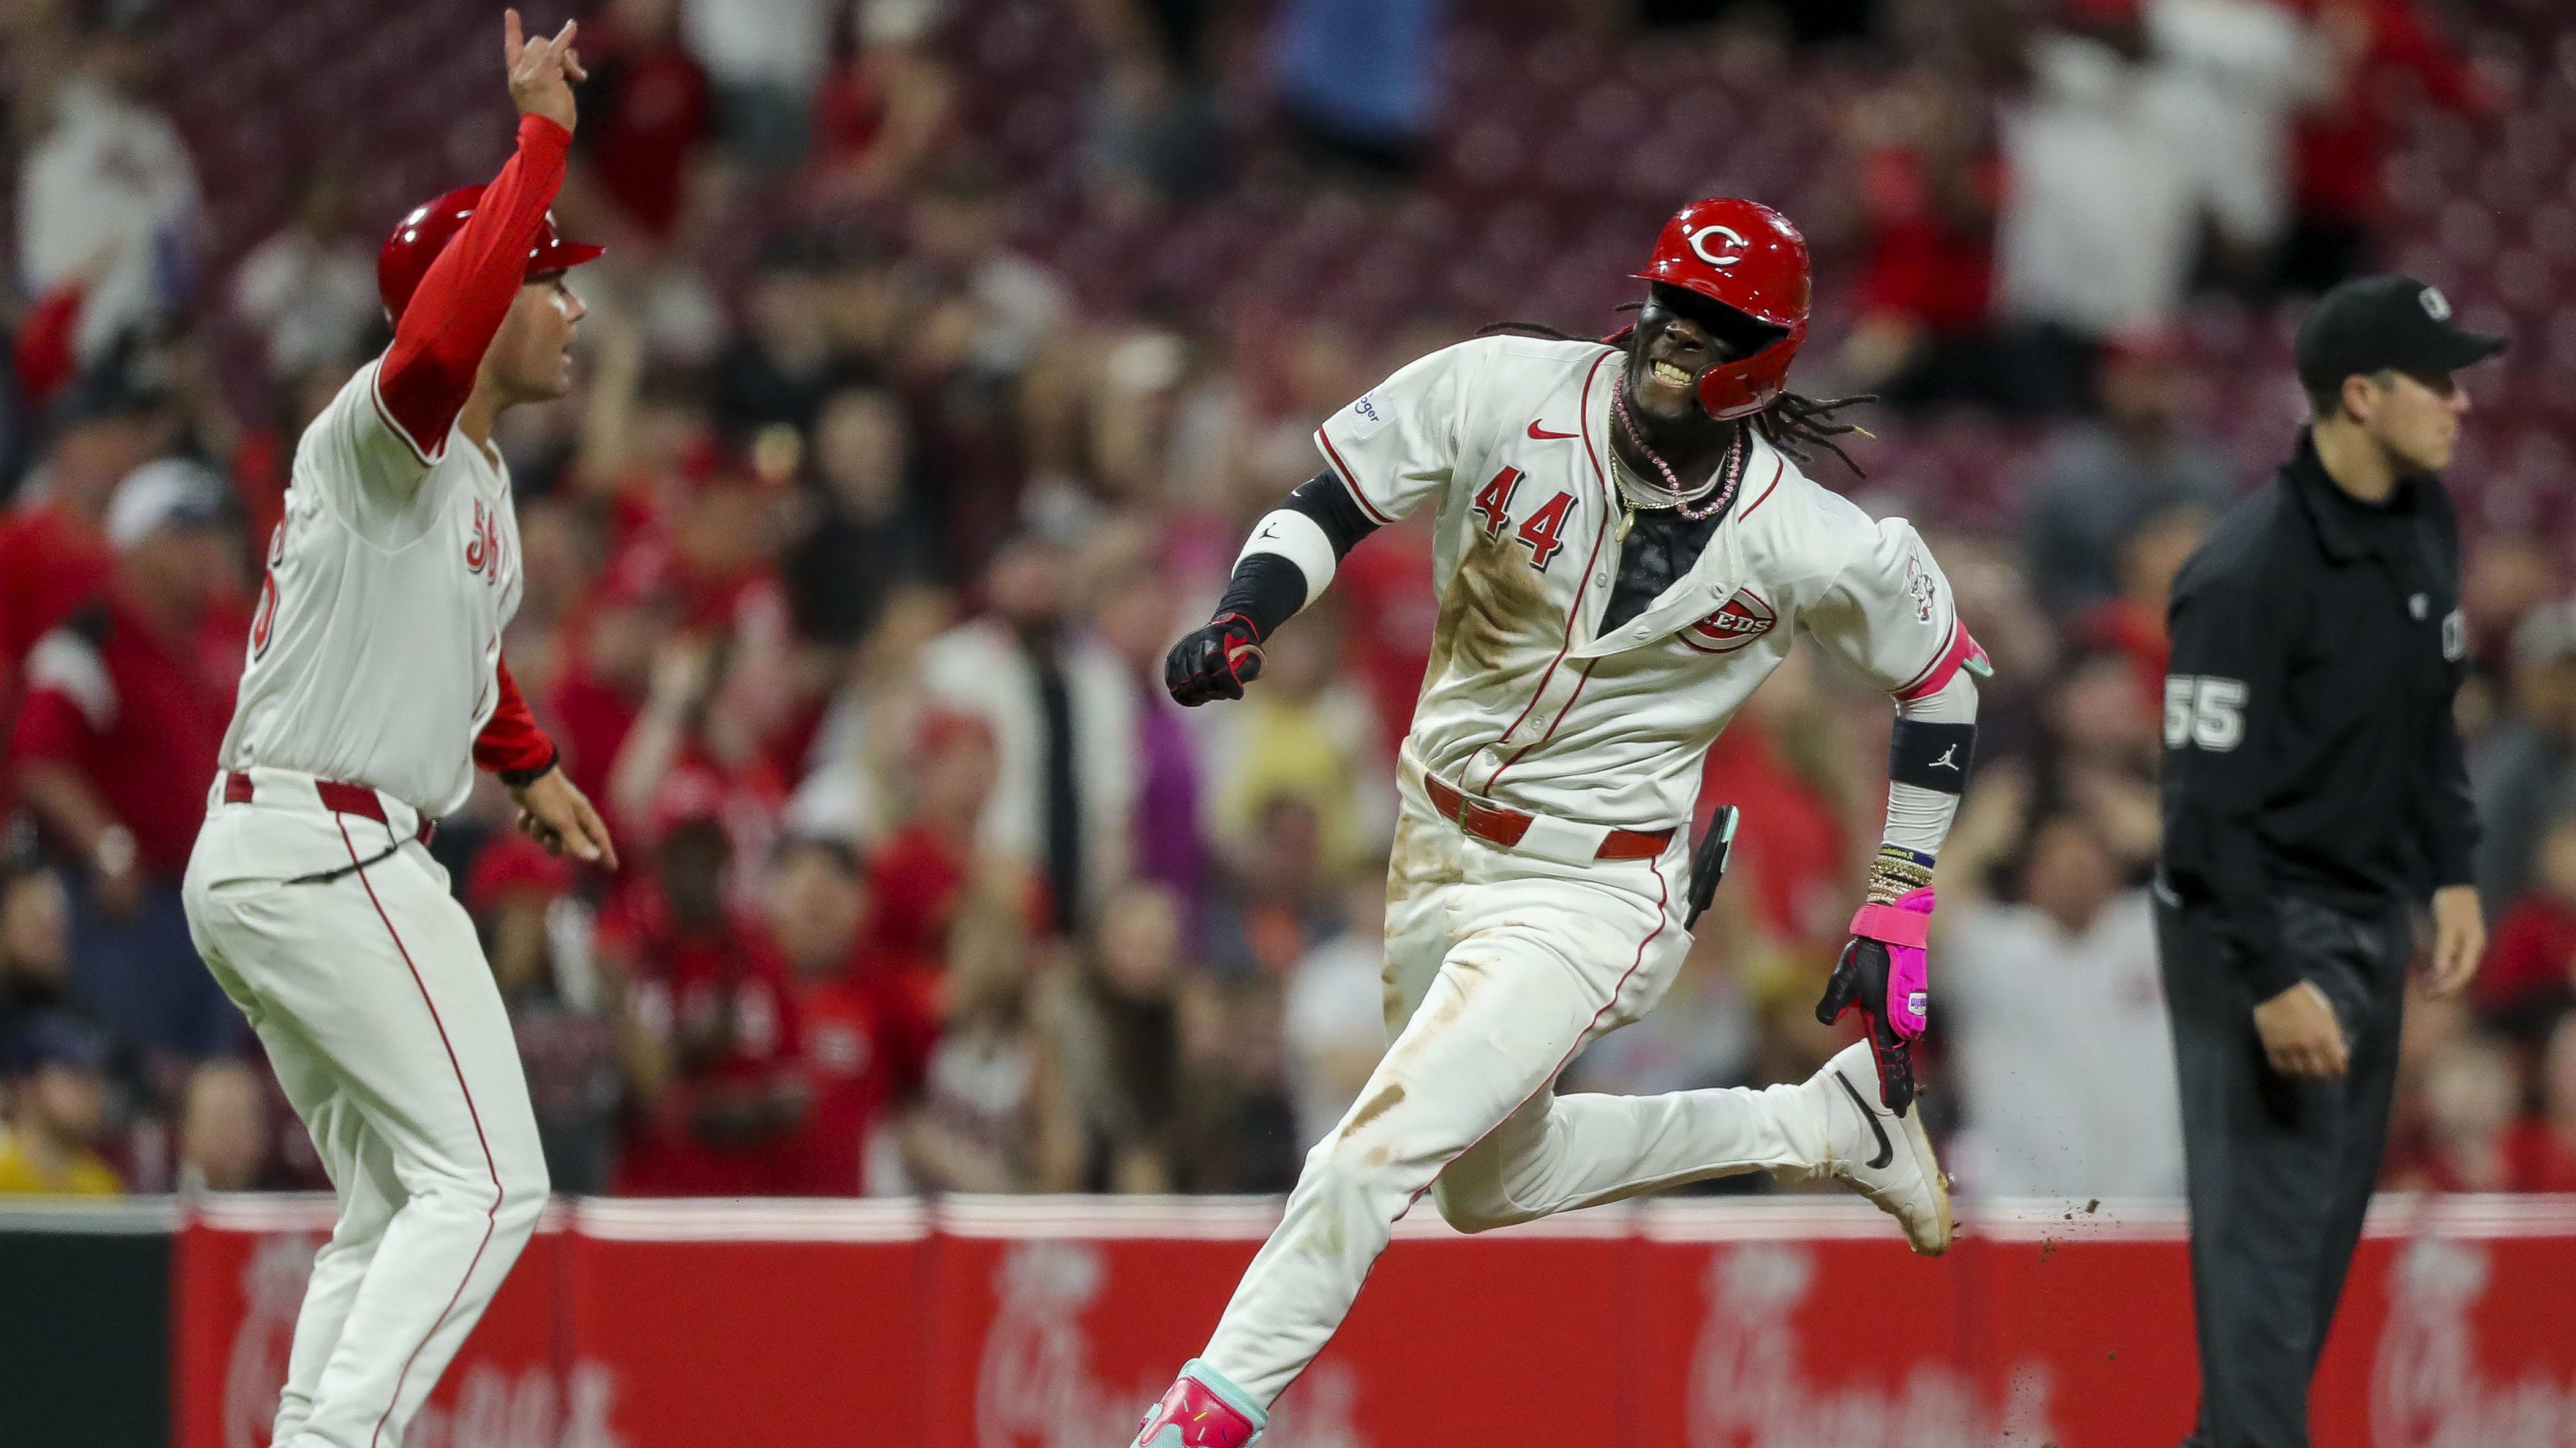 Reds shortstop Elly De La Cruz wowed MLB fans with his blazing speed while hitting an inside-the-park home run. 